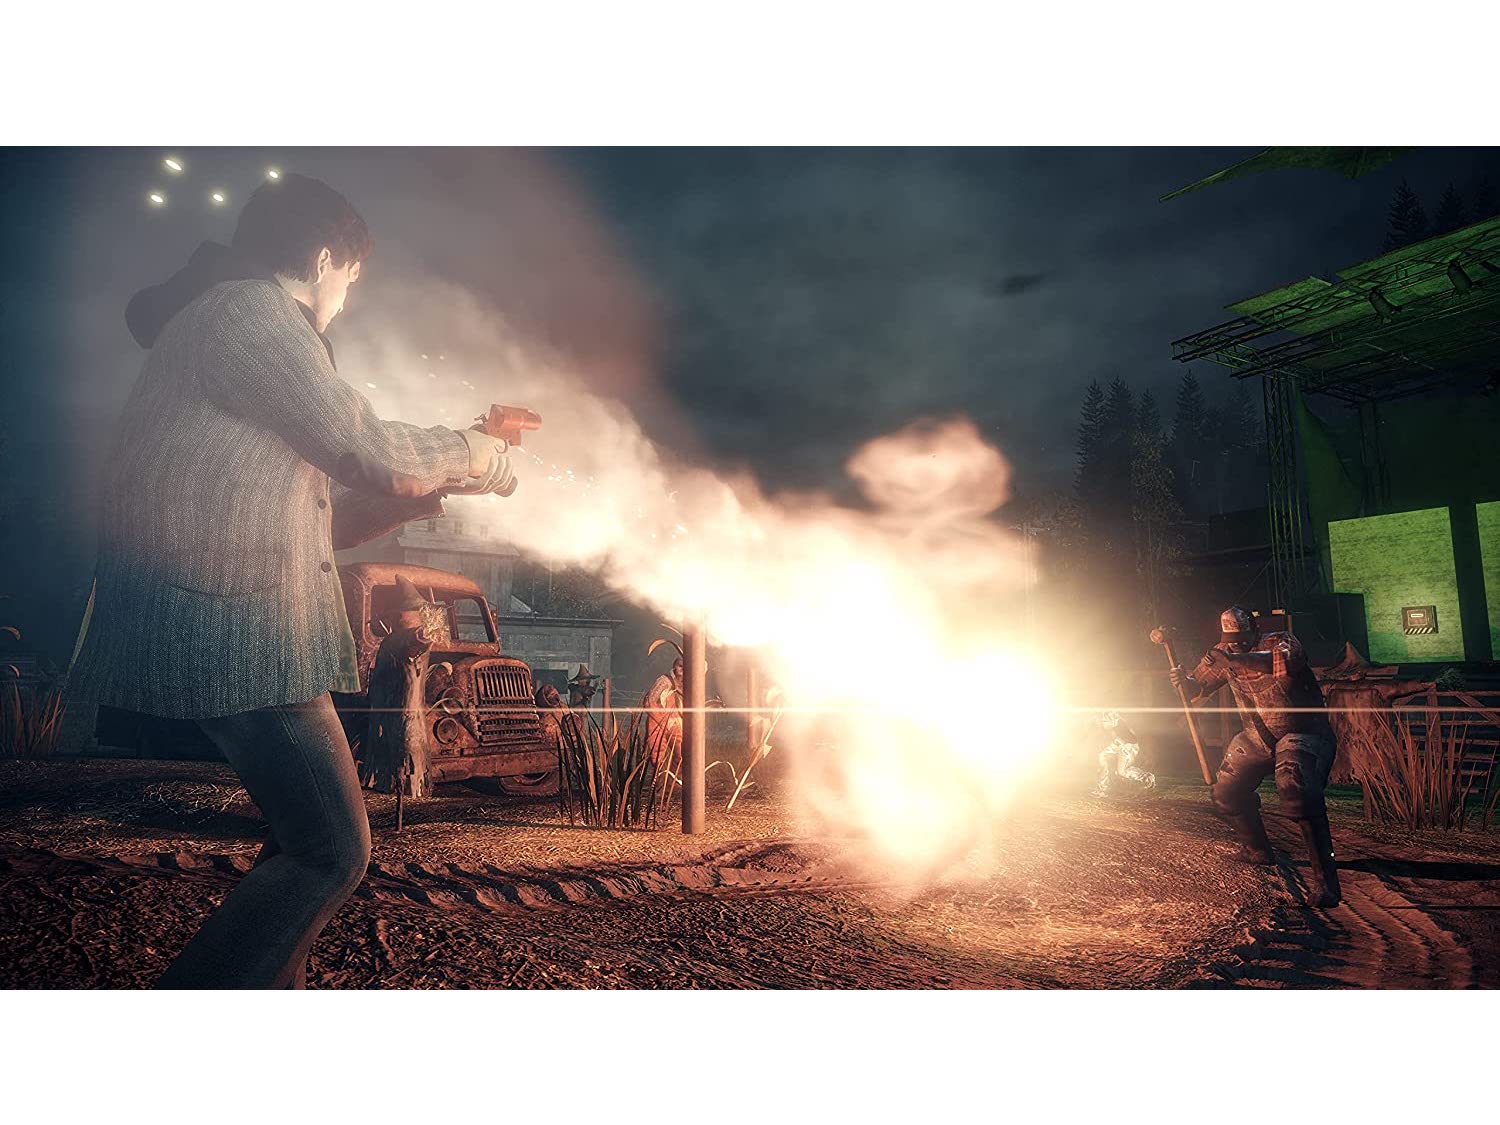 Alan Wake Remastered Review (PS5)